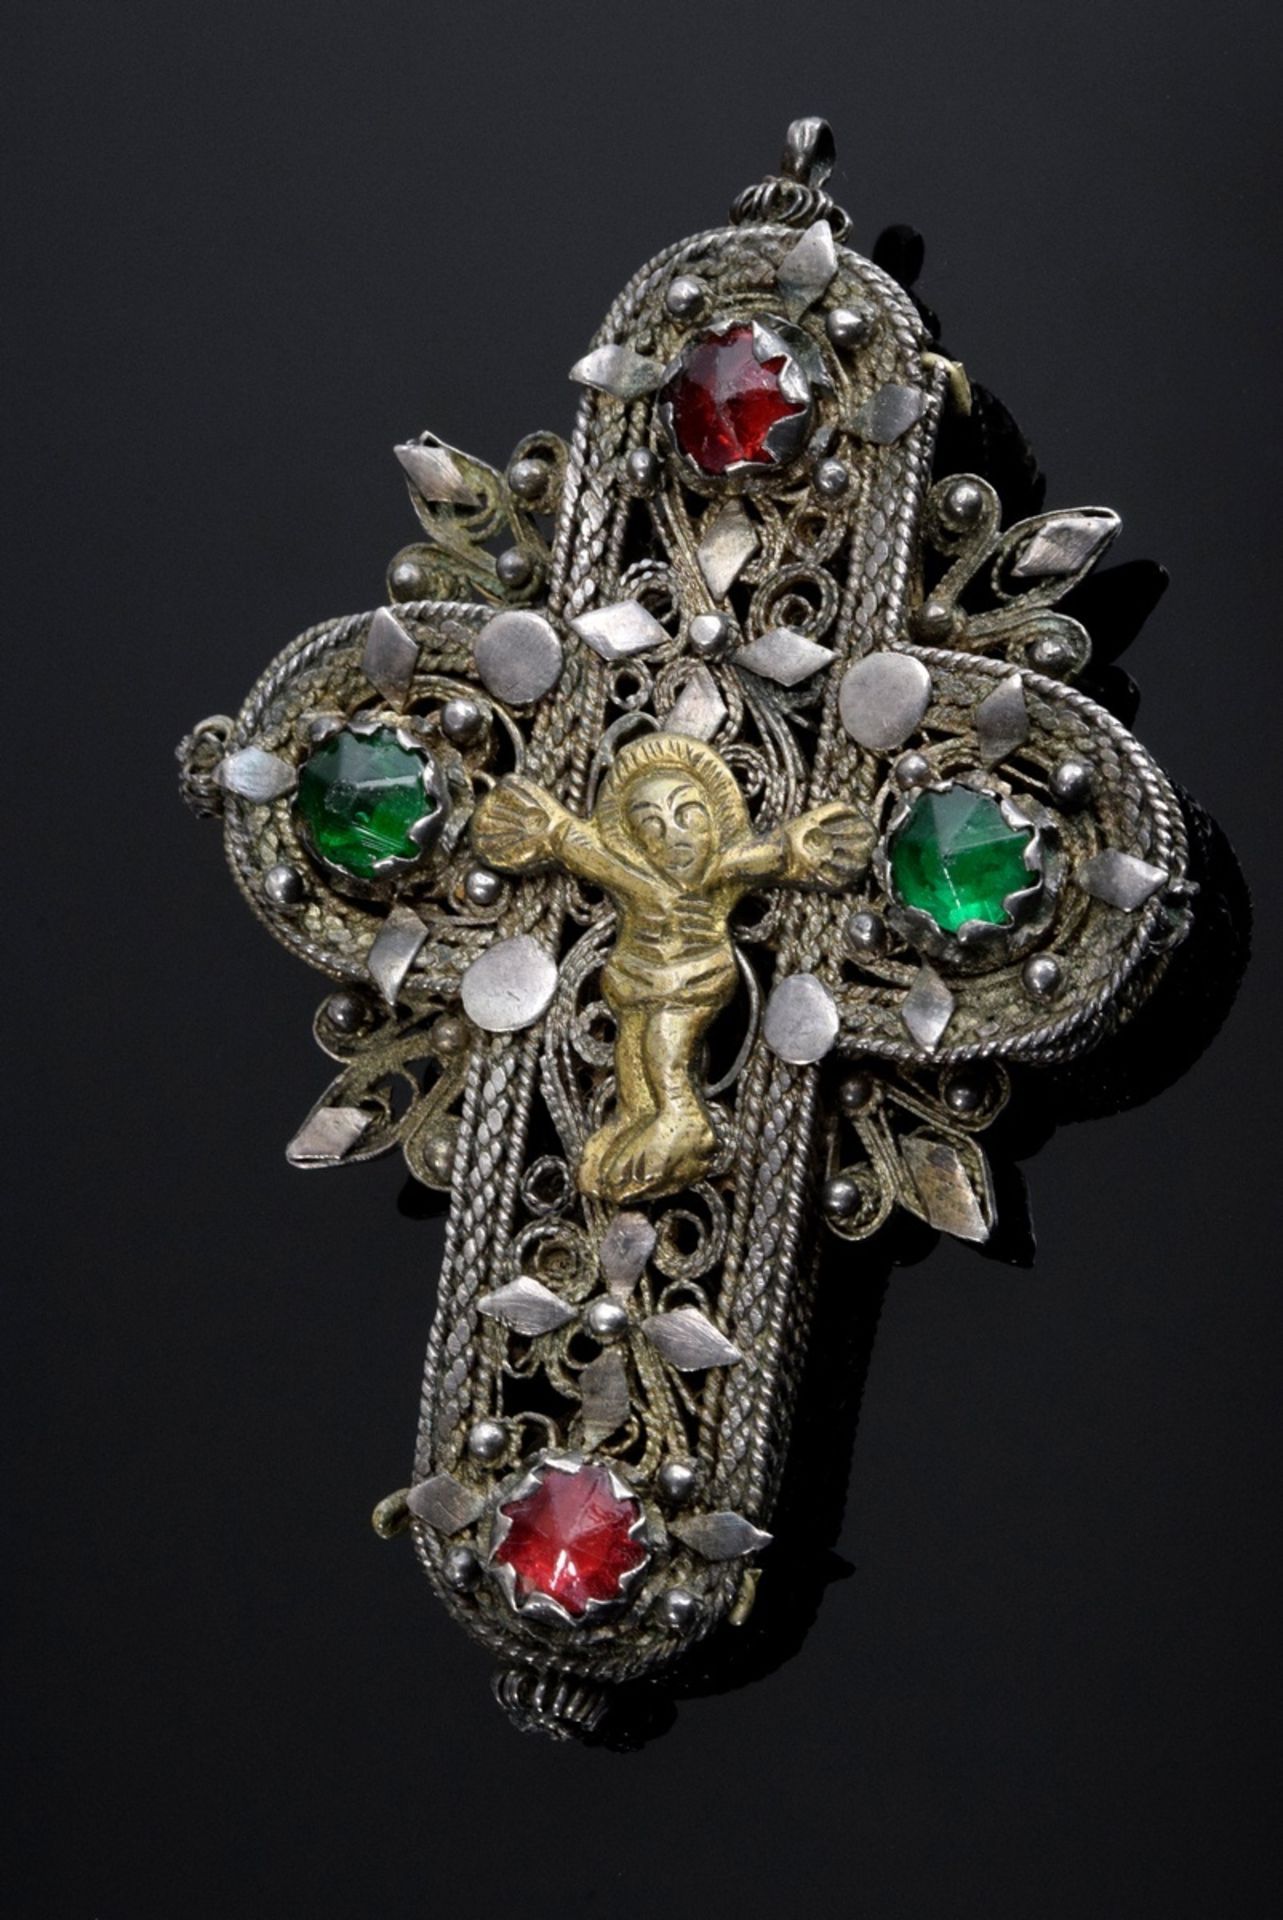 Traditional costume jewellery "Cross" pendant in silver filigree with coloured stones and brass bod